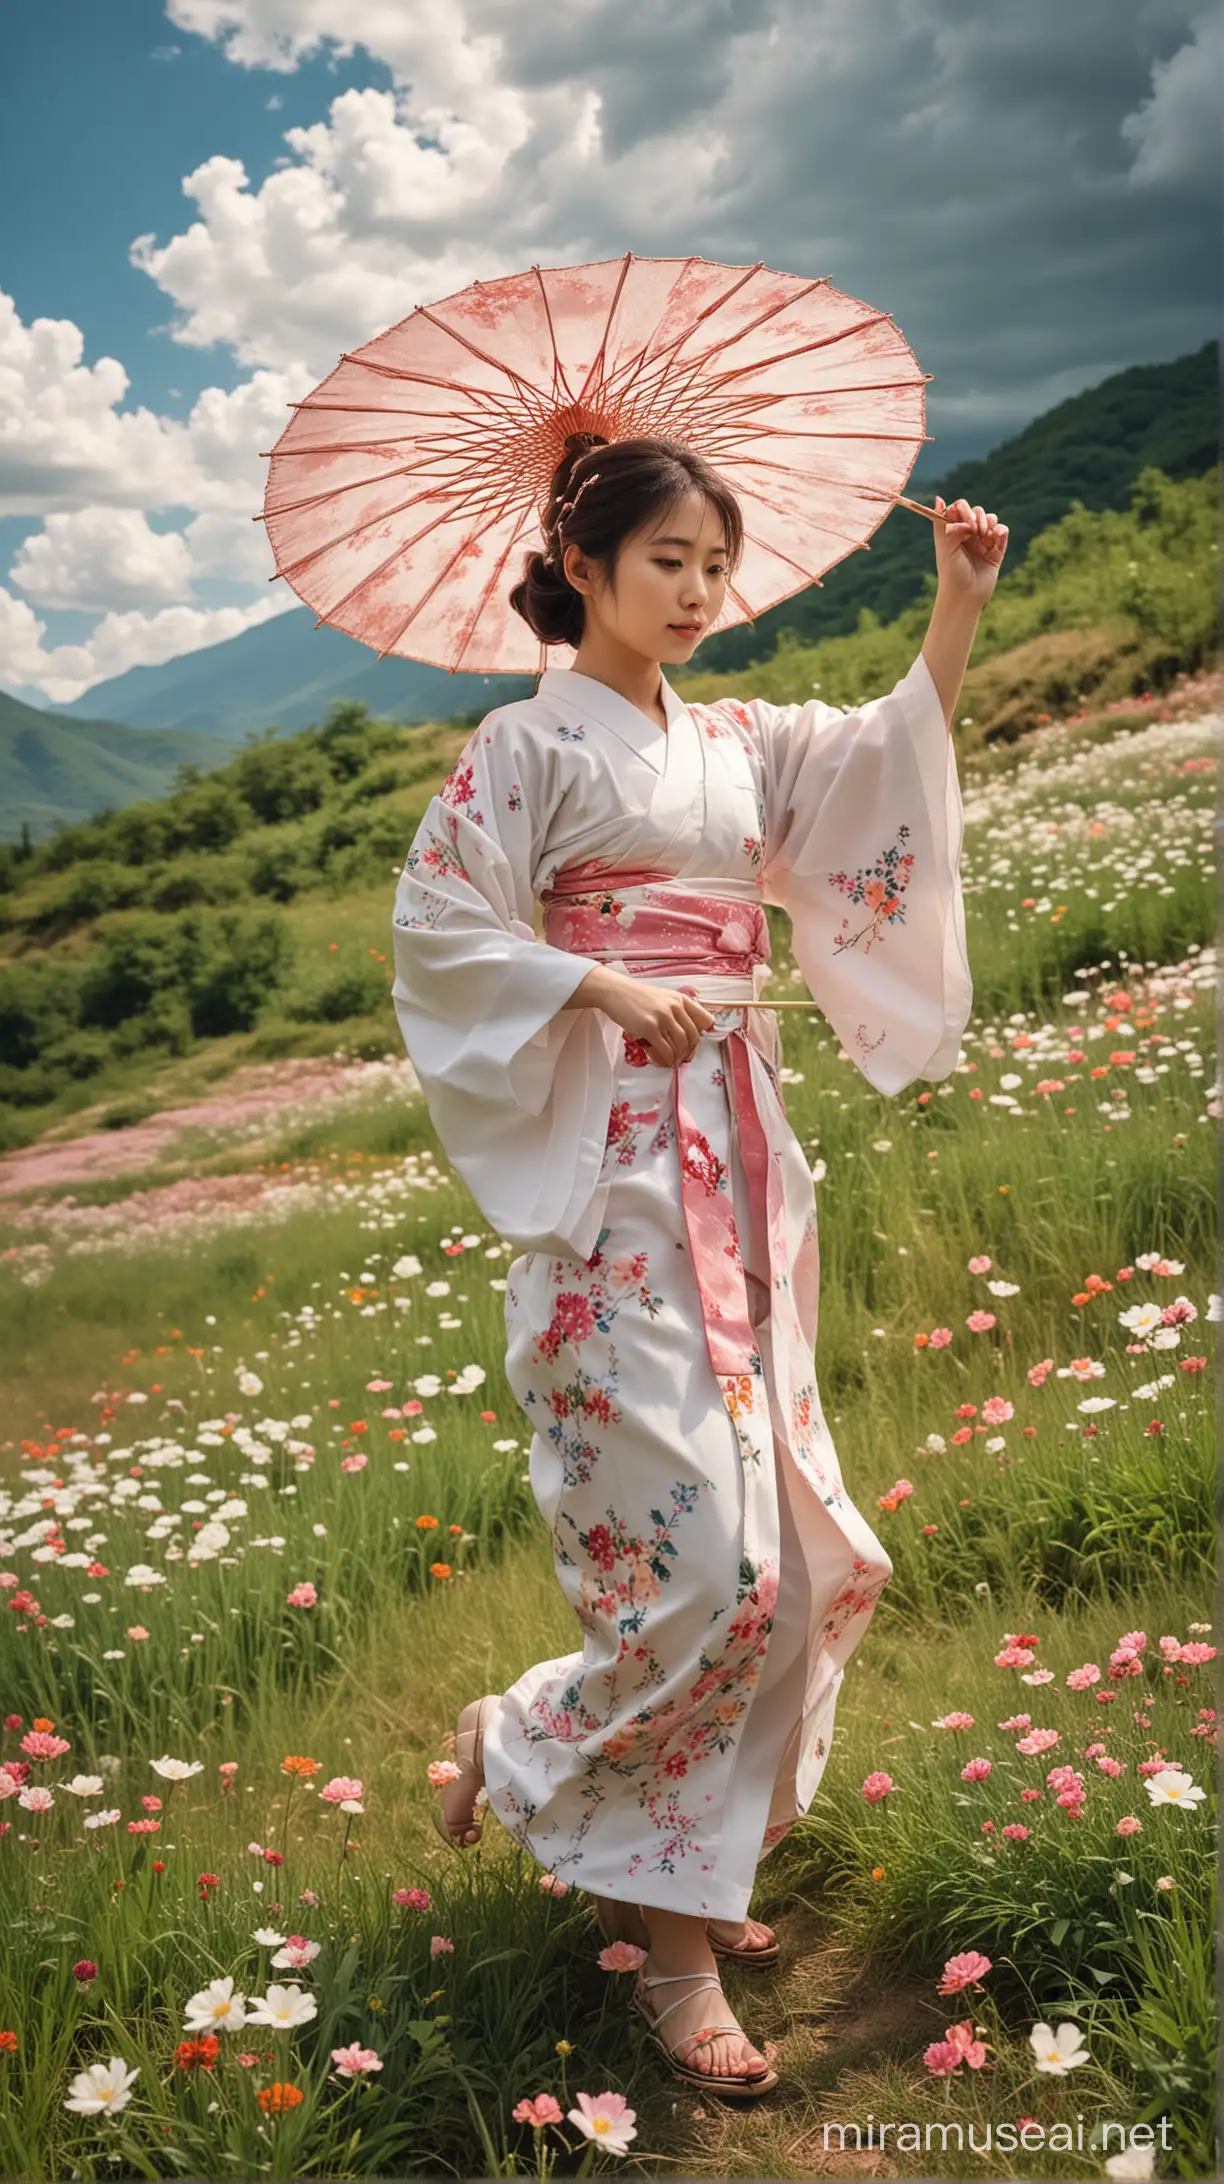 Japanese Girl Stretching in Traditional Dress Amidst Valley Flowers